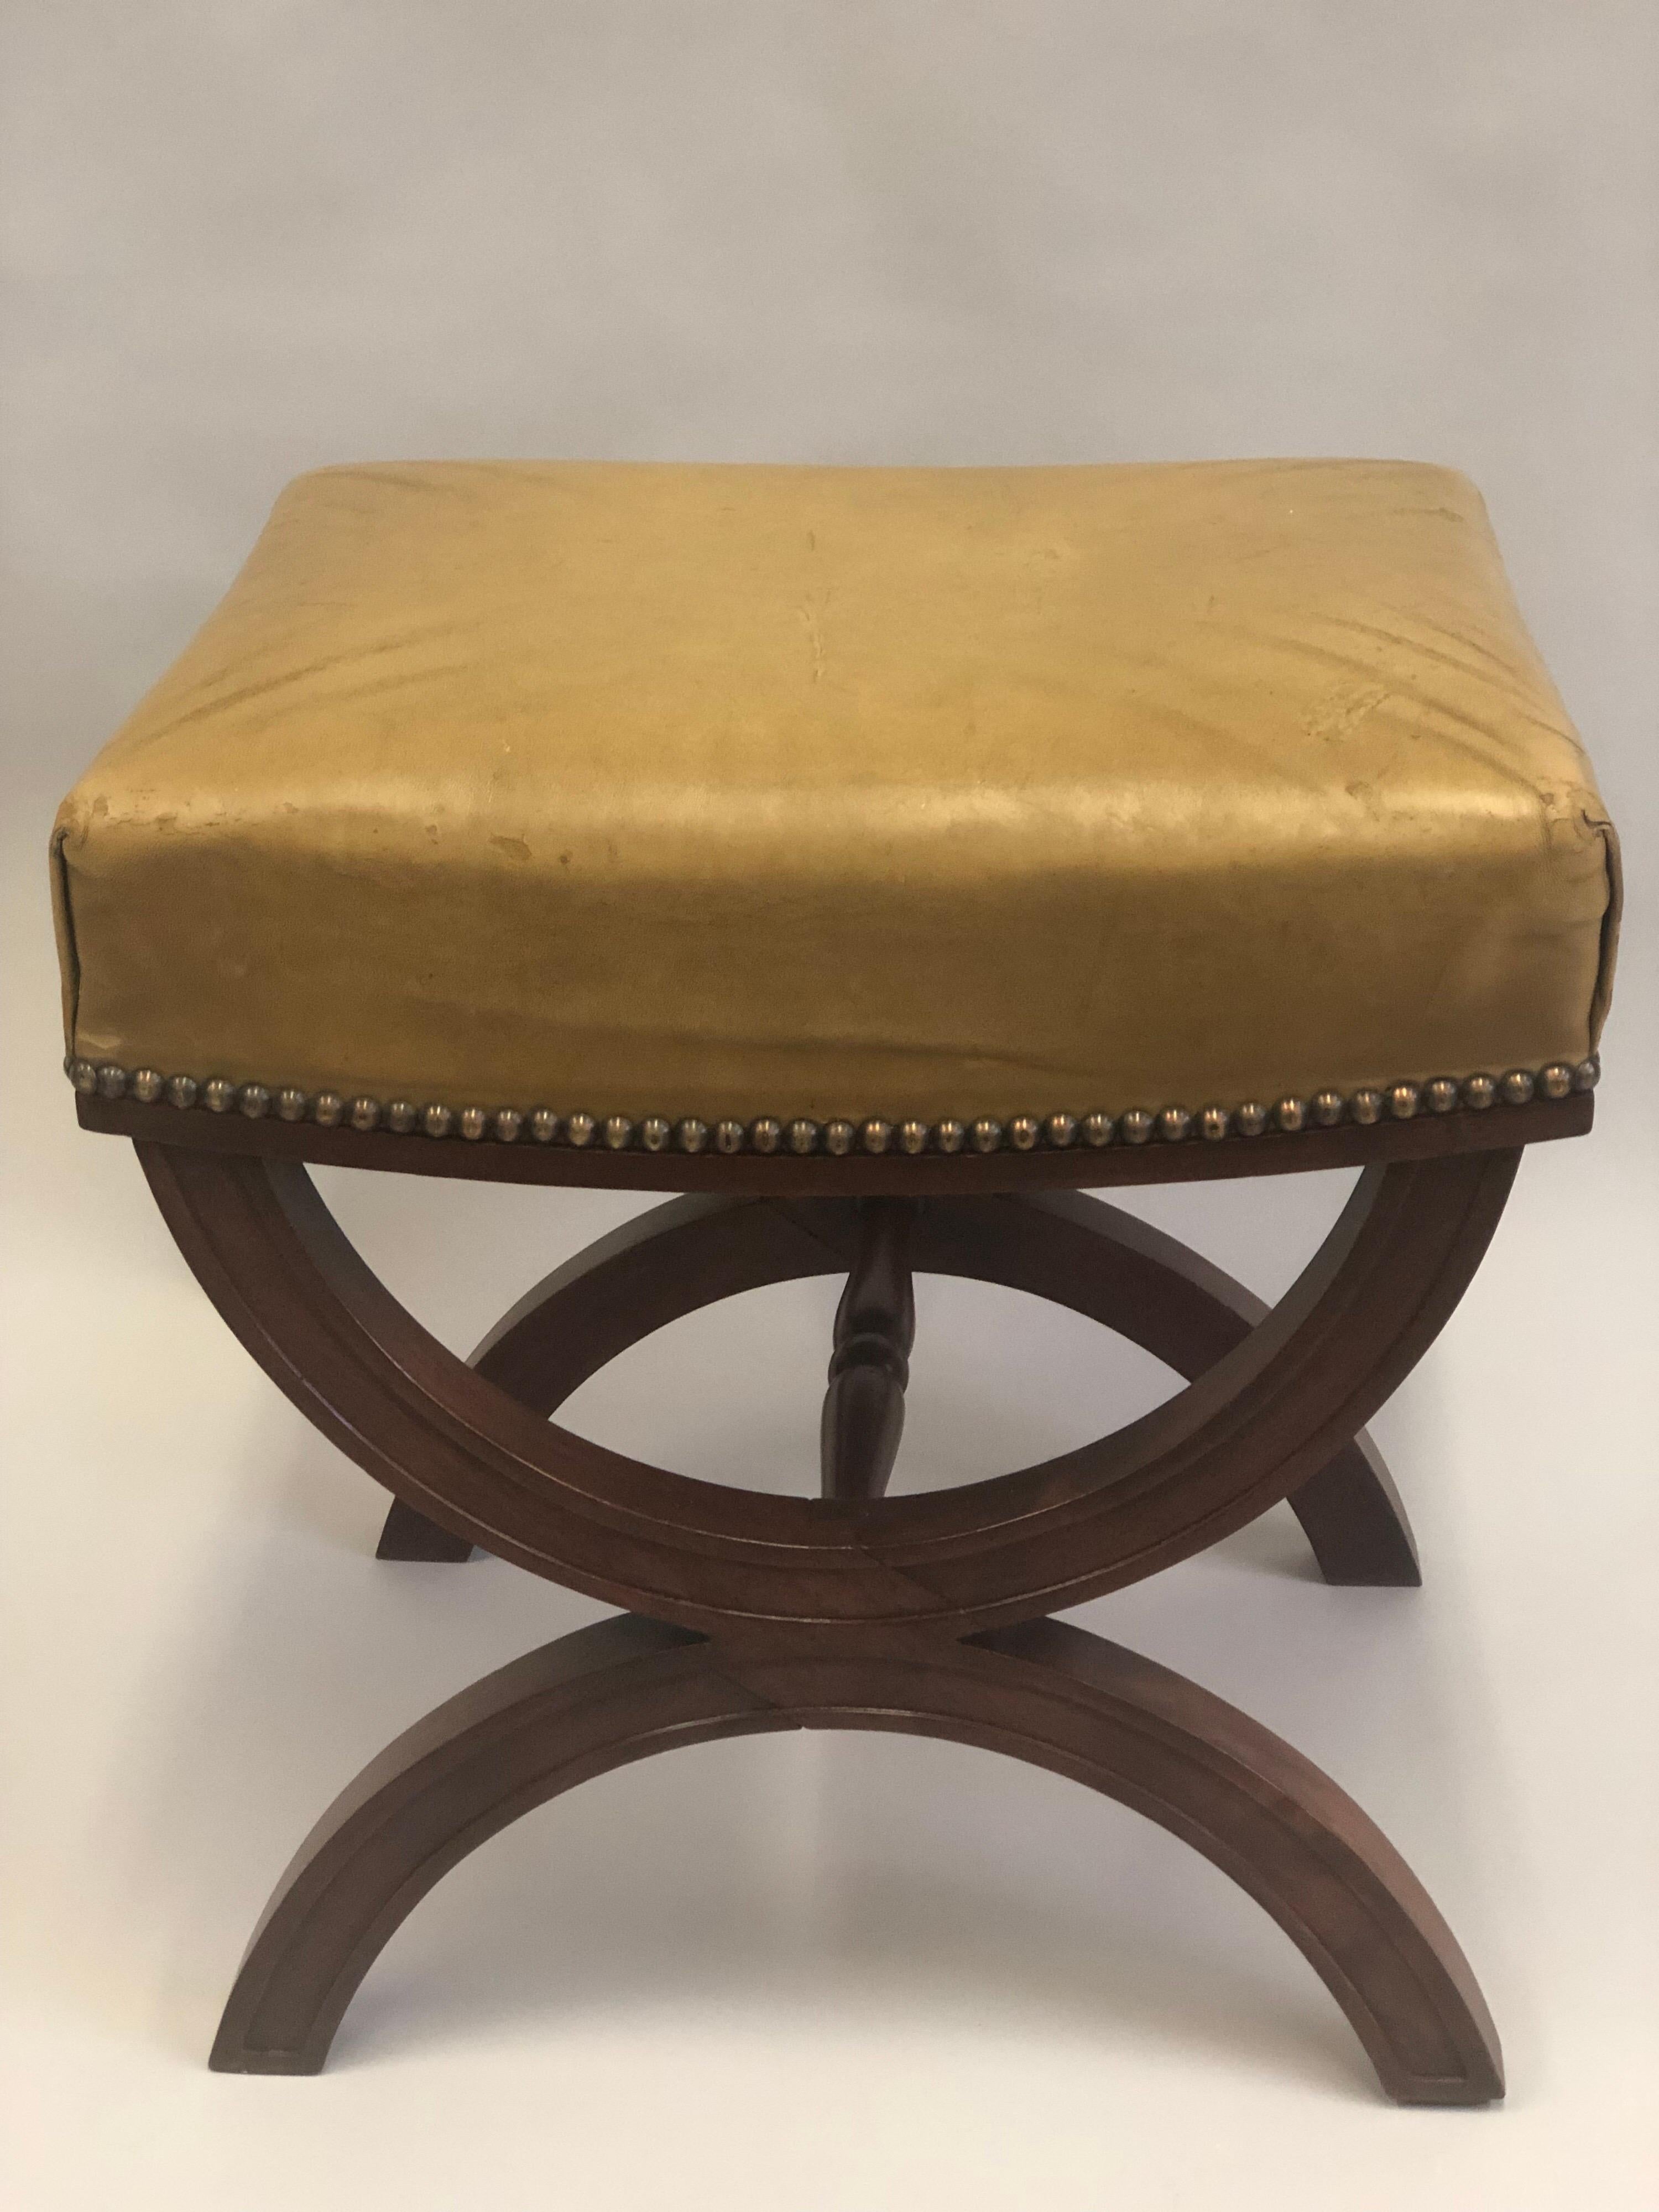 French Modern Neoclassical Mahogany & Leather Benches/ Stools, Andre Arbus, Pair For Sale 2